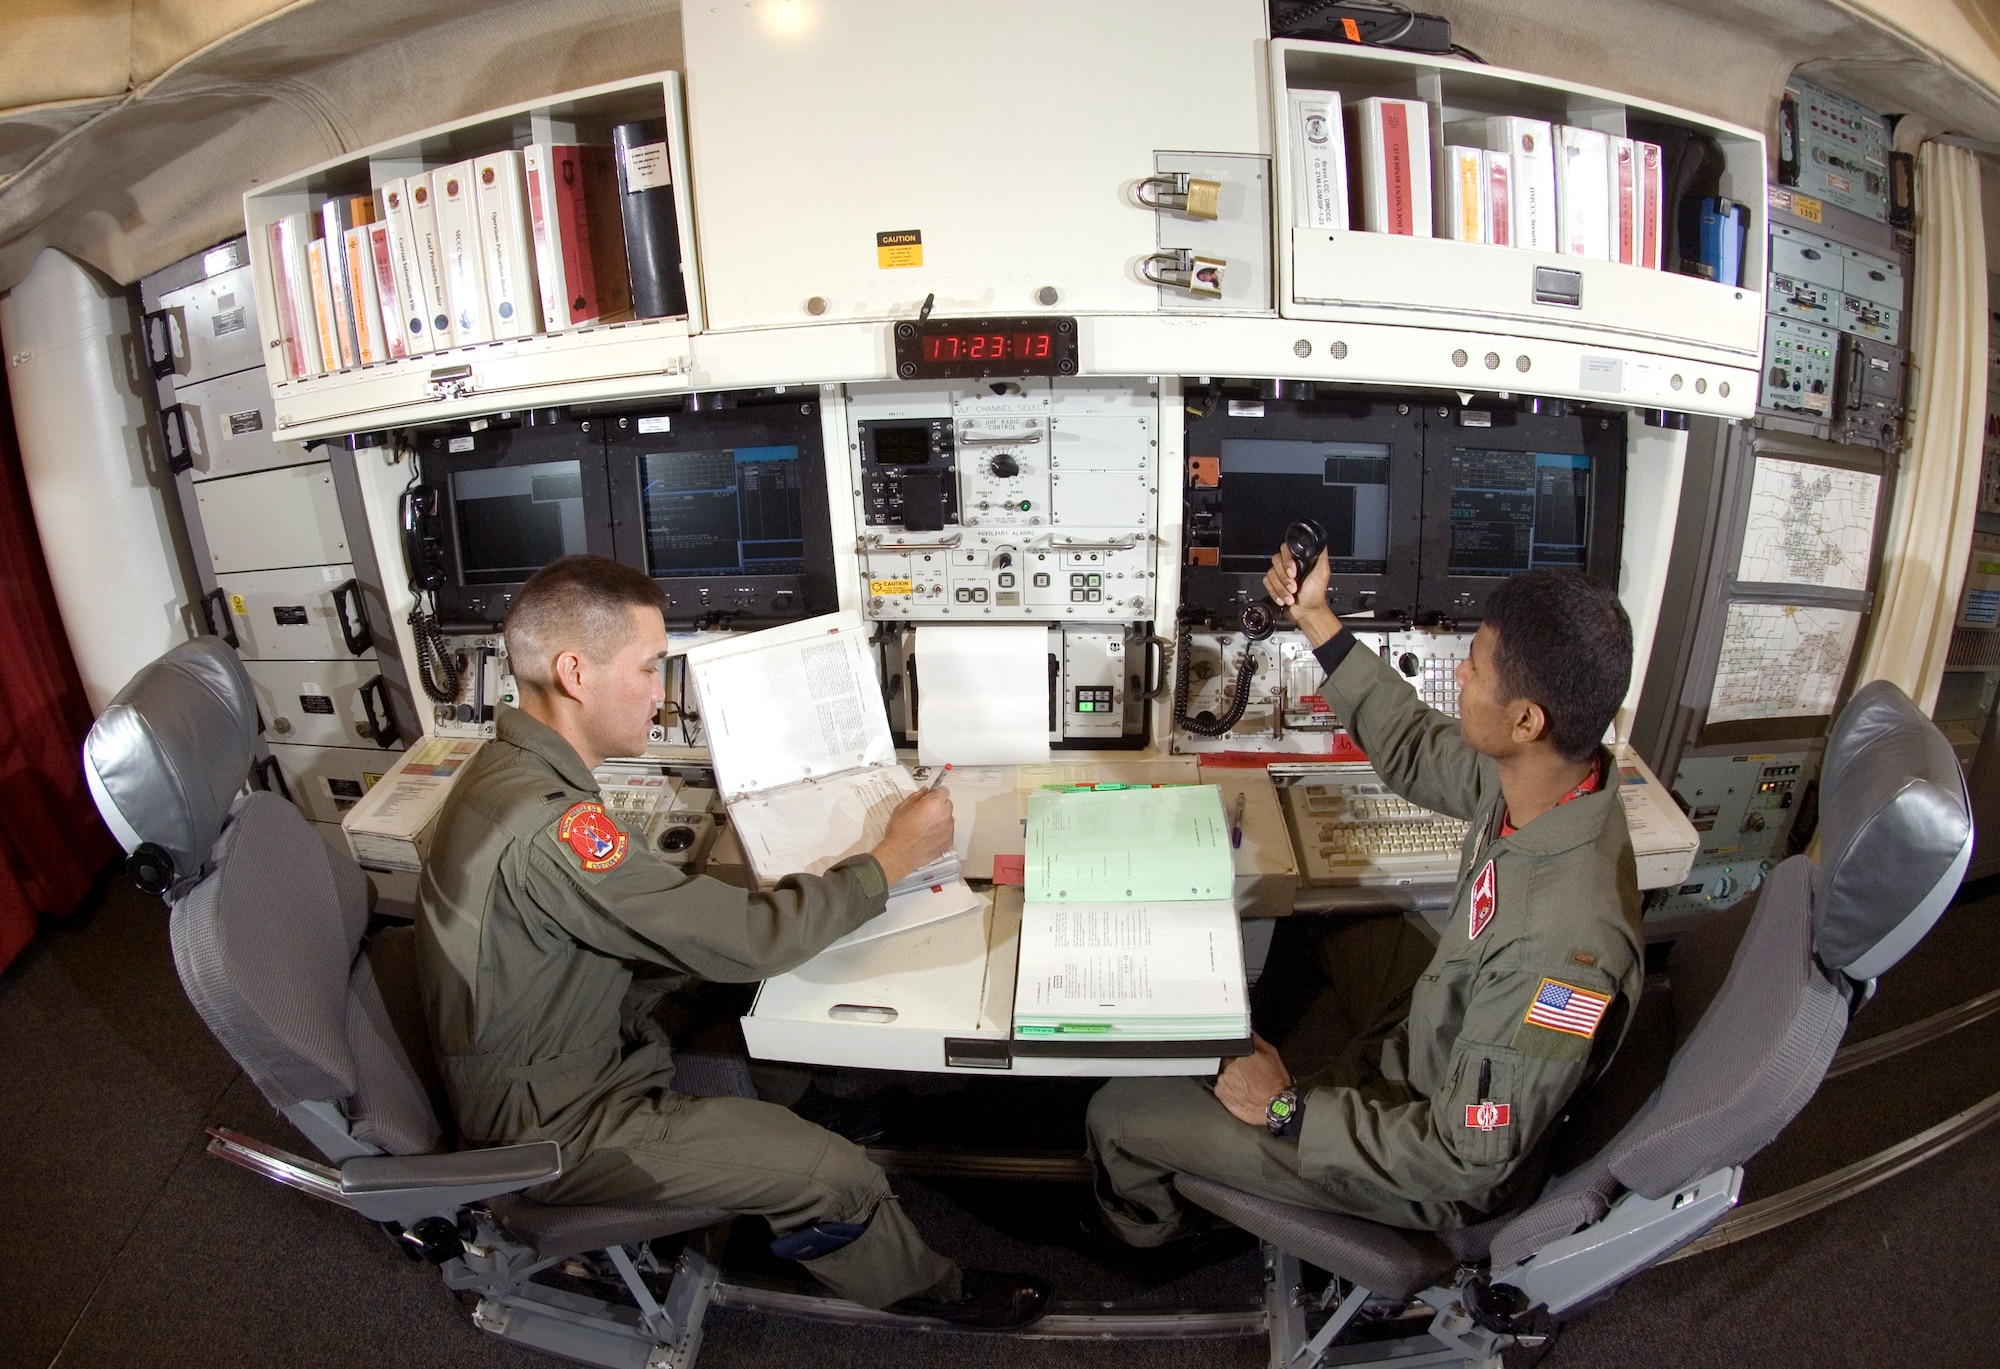 Typically, a two-person missile combat crew is on alert in an underground launch control center for 24 hours at a time monitoring their ICBMs, ready to launch them if directed.  Under a test being conducted by 20th Air Force officials, three-person crews are going to pull 72-hour alerts at select facilities to weigh the advantages of going to such a schedule.  Officials from 20th Air Force will evaluate the test after three months to determine whether to implement the initiative across the entire missile force.   (U.S. Air Force photo/Master Sgt. Lance Cheung)